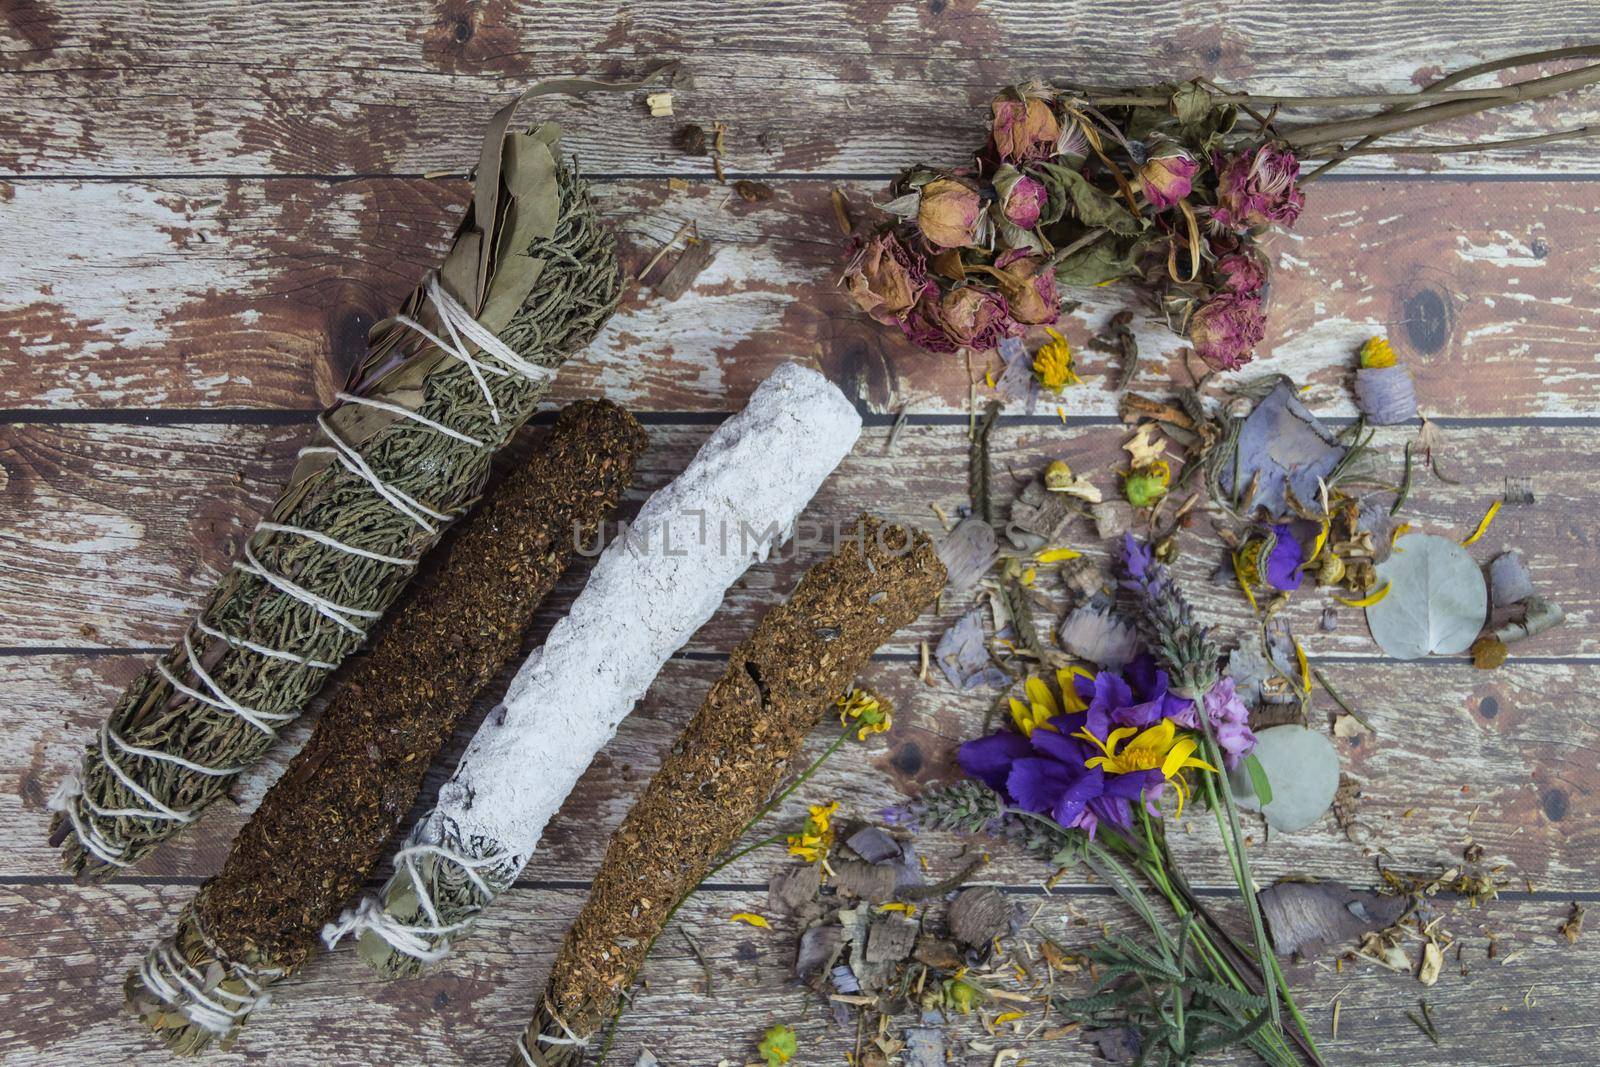 Sahumos, handmade incenses made with herbs and flowers, For cleaning rituals by GabrielaBertolini